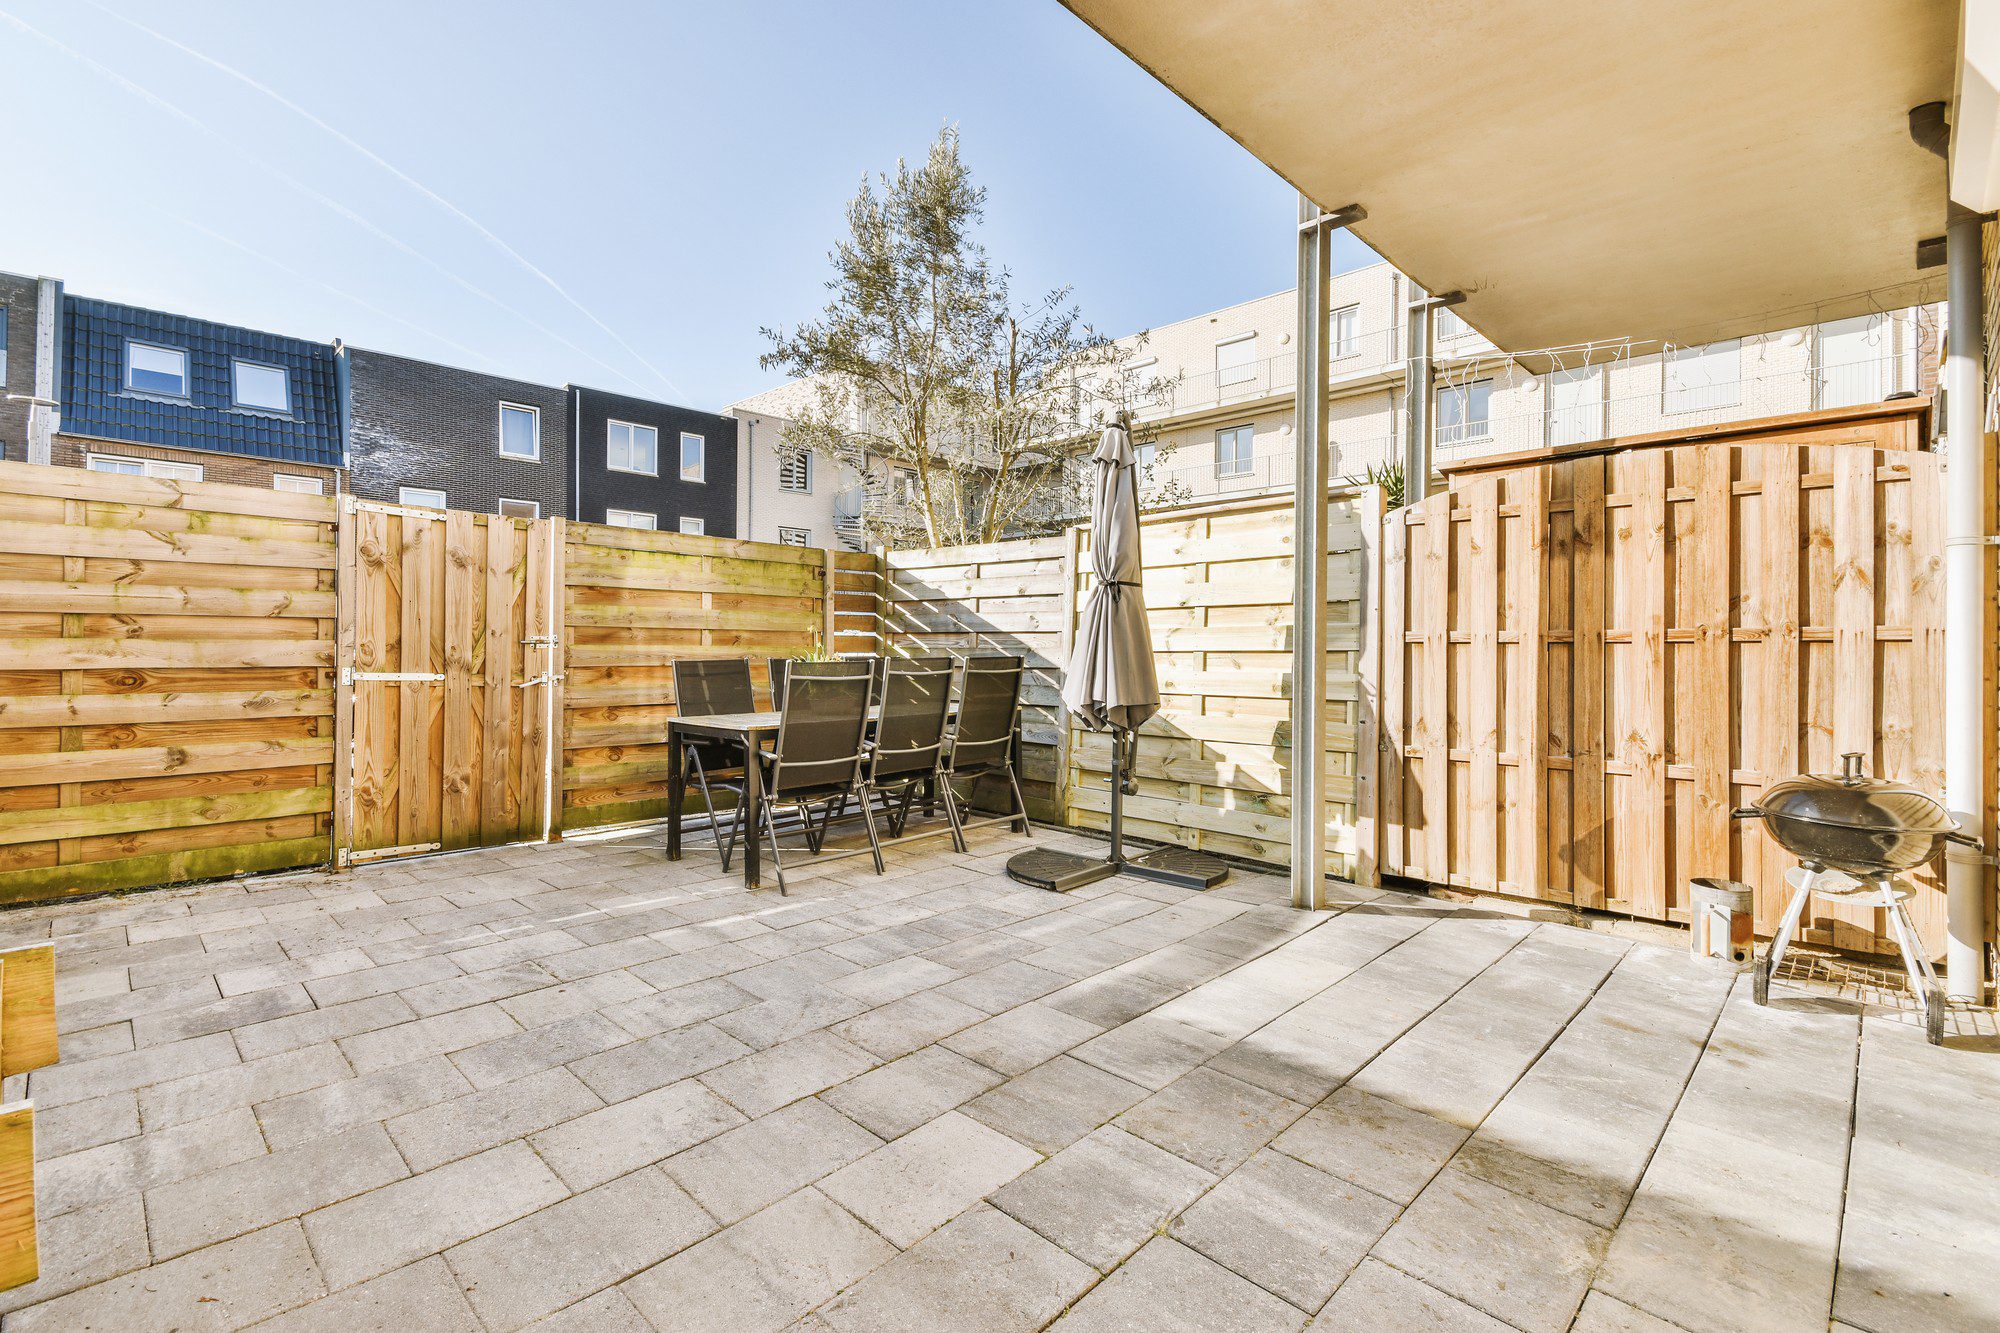 This image shows a residential backyard patio area. The patio floor is made up of large square paving stones. There is a wooden fence enclosing the space, providing privacy, and a wooden gate can be seen at the centre of the fence. Within the patio, there is a set of outdoor furniture that includes a table and four chairs, suggesting a space for dining or relaxation. An upright parasol is beside the table, currently closed, and to the right, there is a kettle-style charcoal grill. Off to the side, there's also a small tree and the edge of what appears to be either a shelter or a part of the house extending over the patio, potentially providing some shade. The weather seems to be sunny and the sky is clear. The buildings in the background have a modern architectural style.